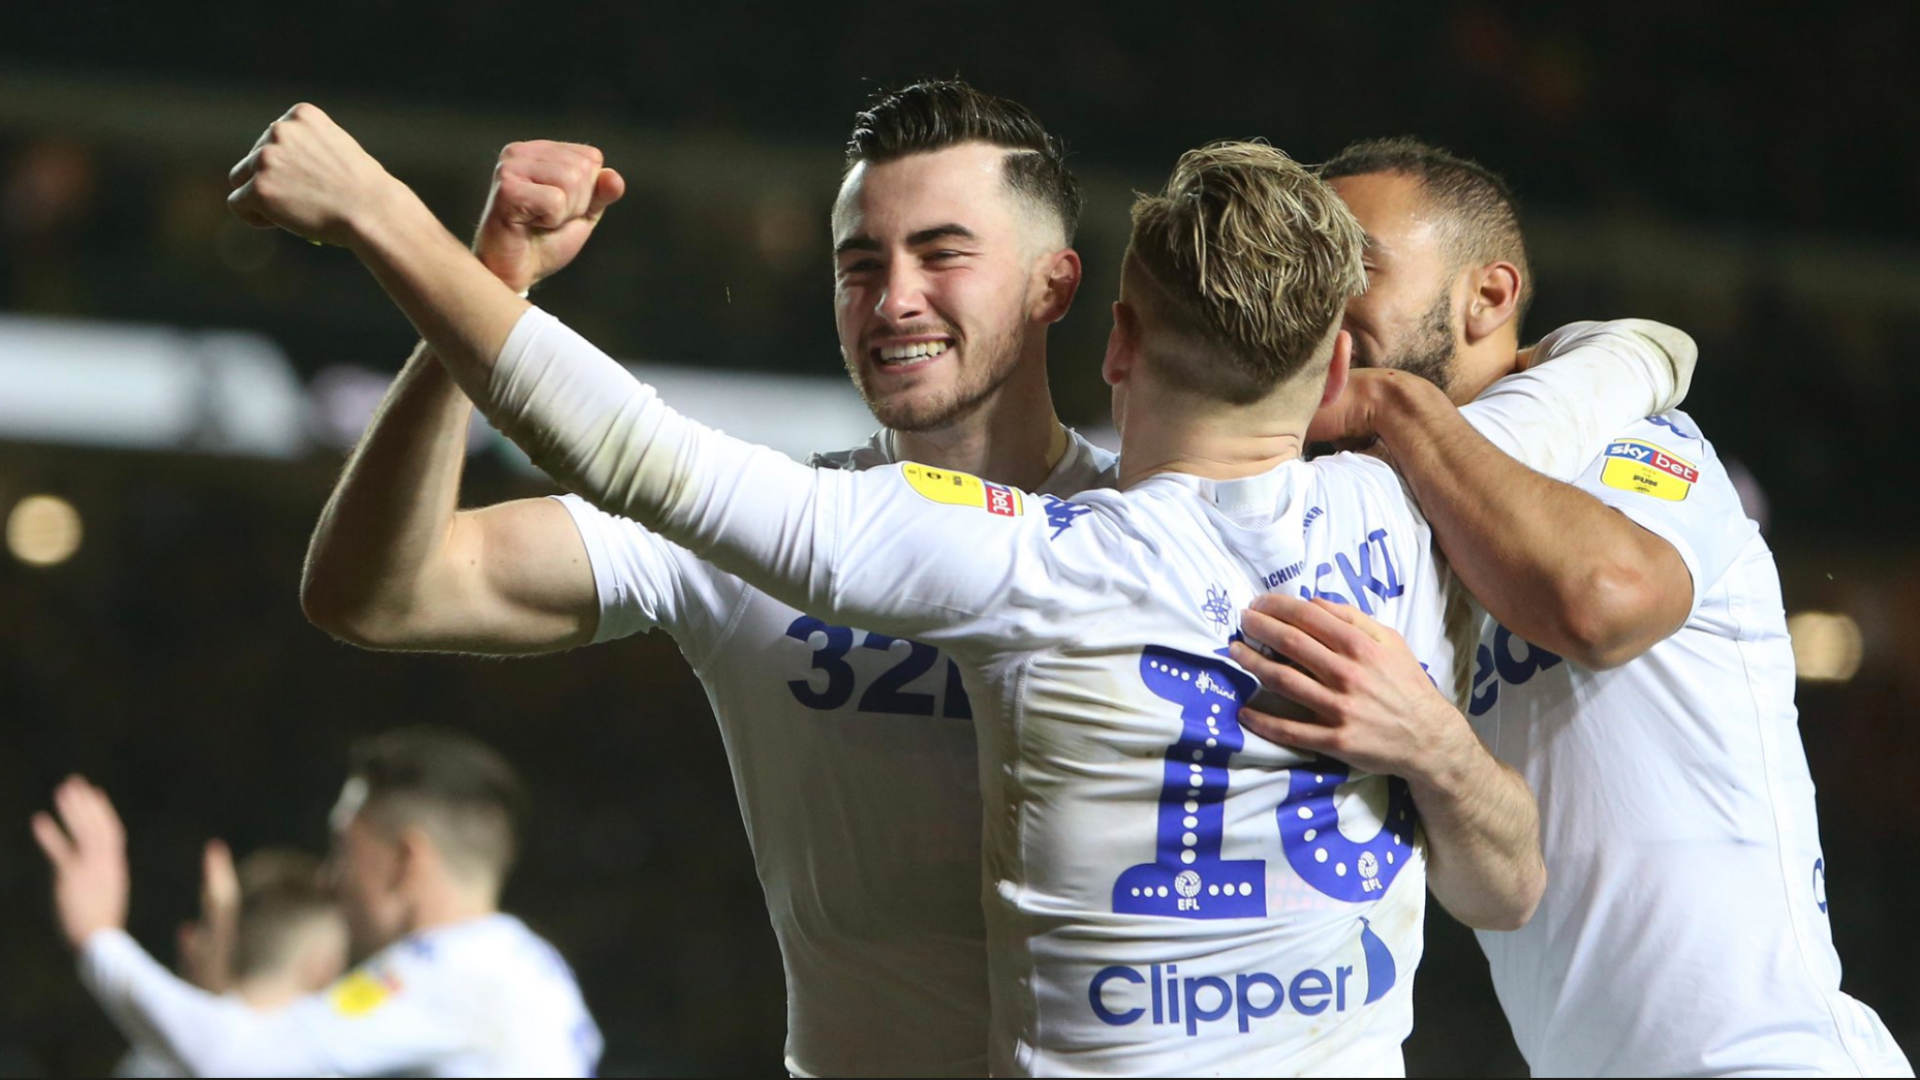 Marcelo Bielsa sensationally owned up to the Leeds United spy scandal, before the Championship leaders beat Derby County 2-0 on Friday.